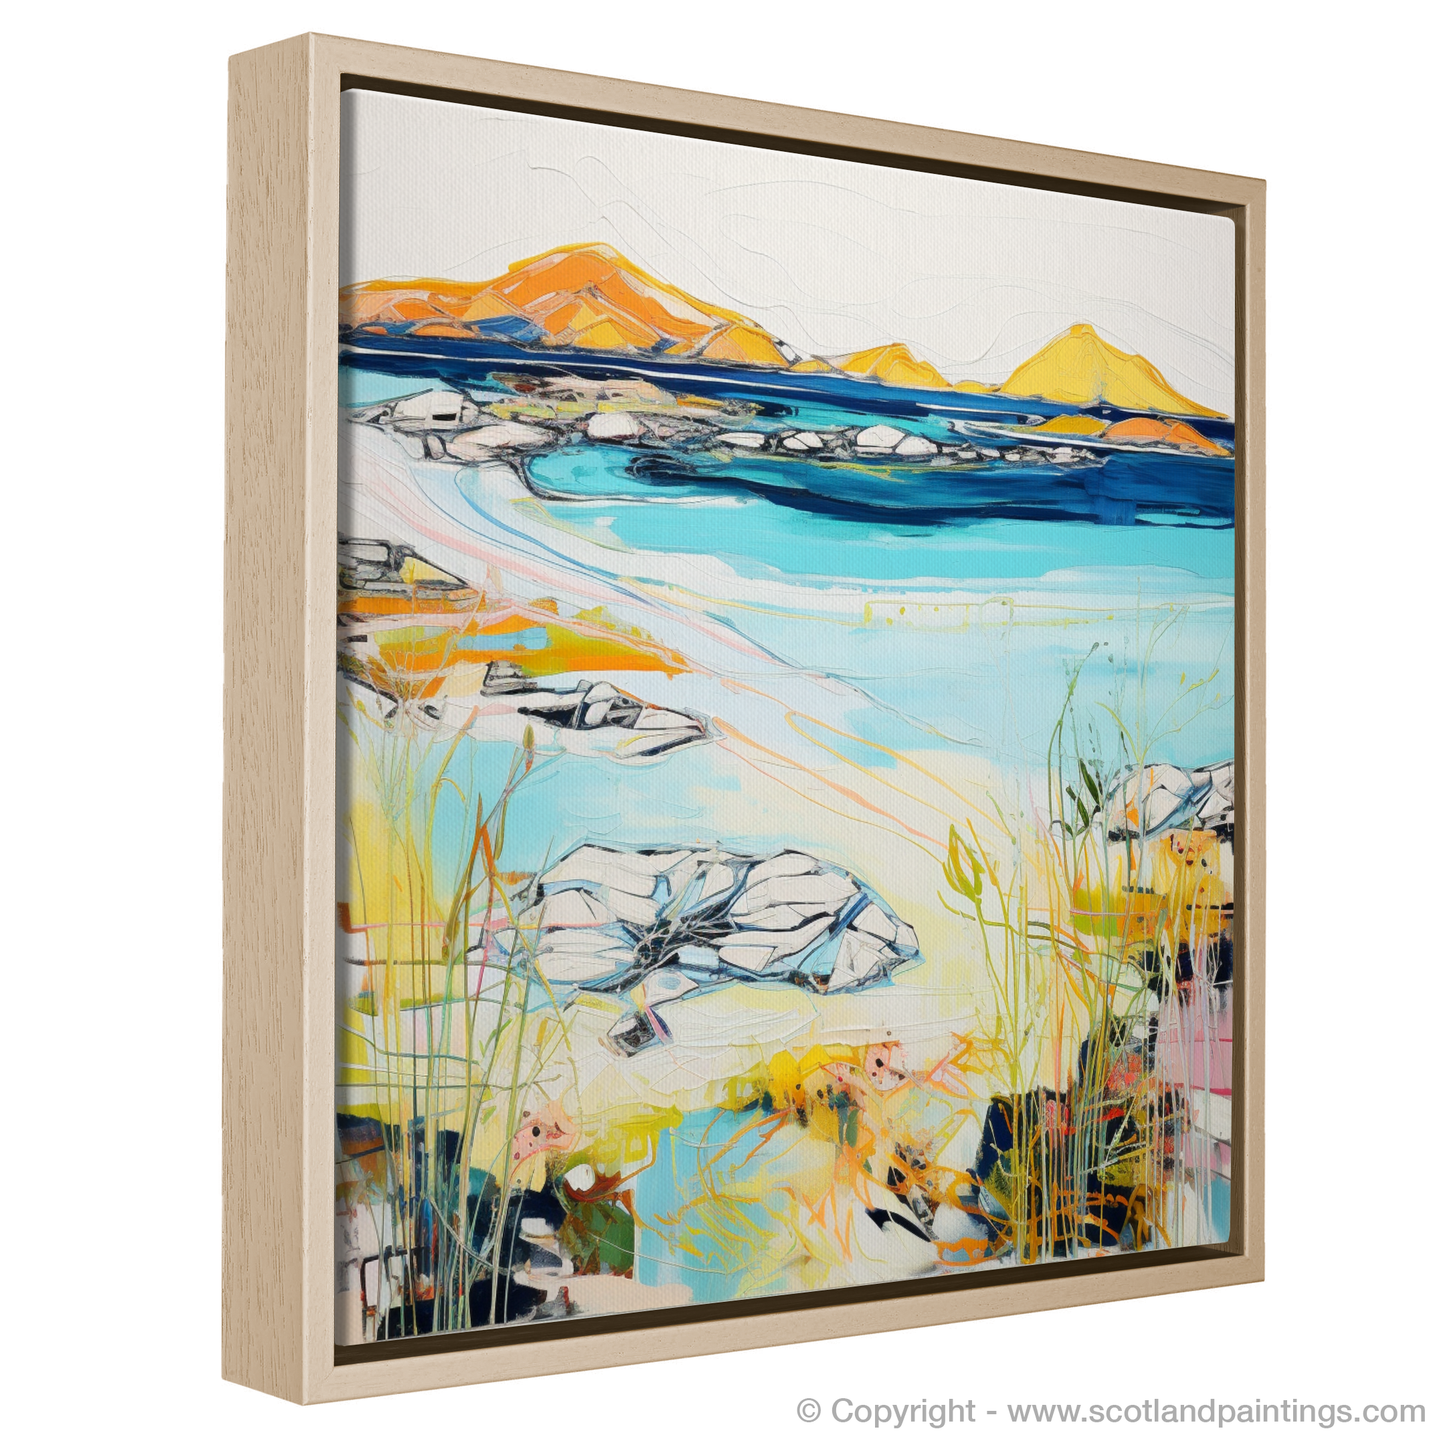 Painting and Art Print of Isle of Barra entitled "Isle of Barra: A Symphony of Colours".